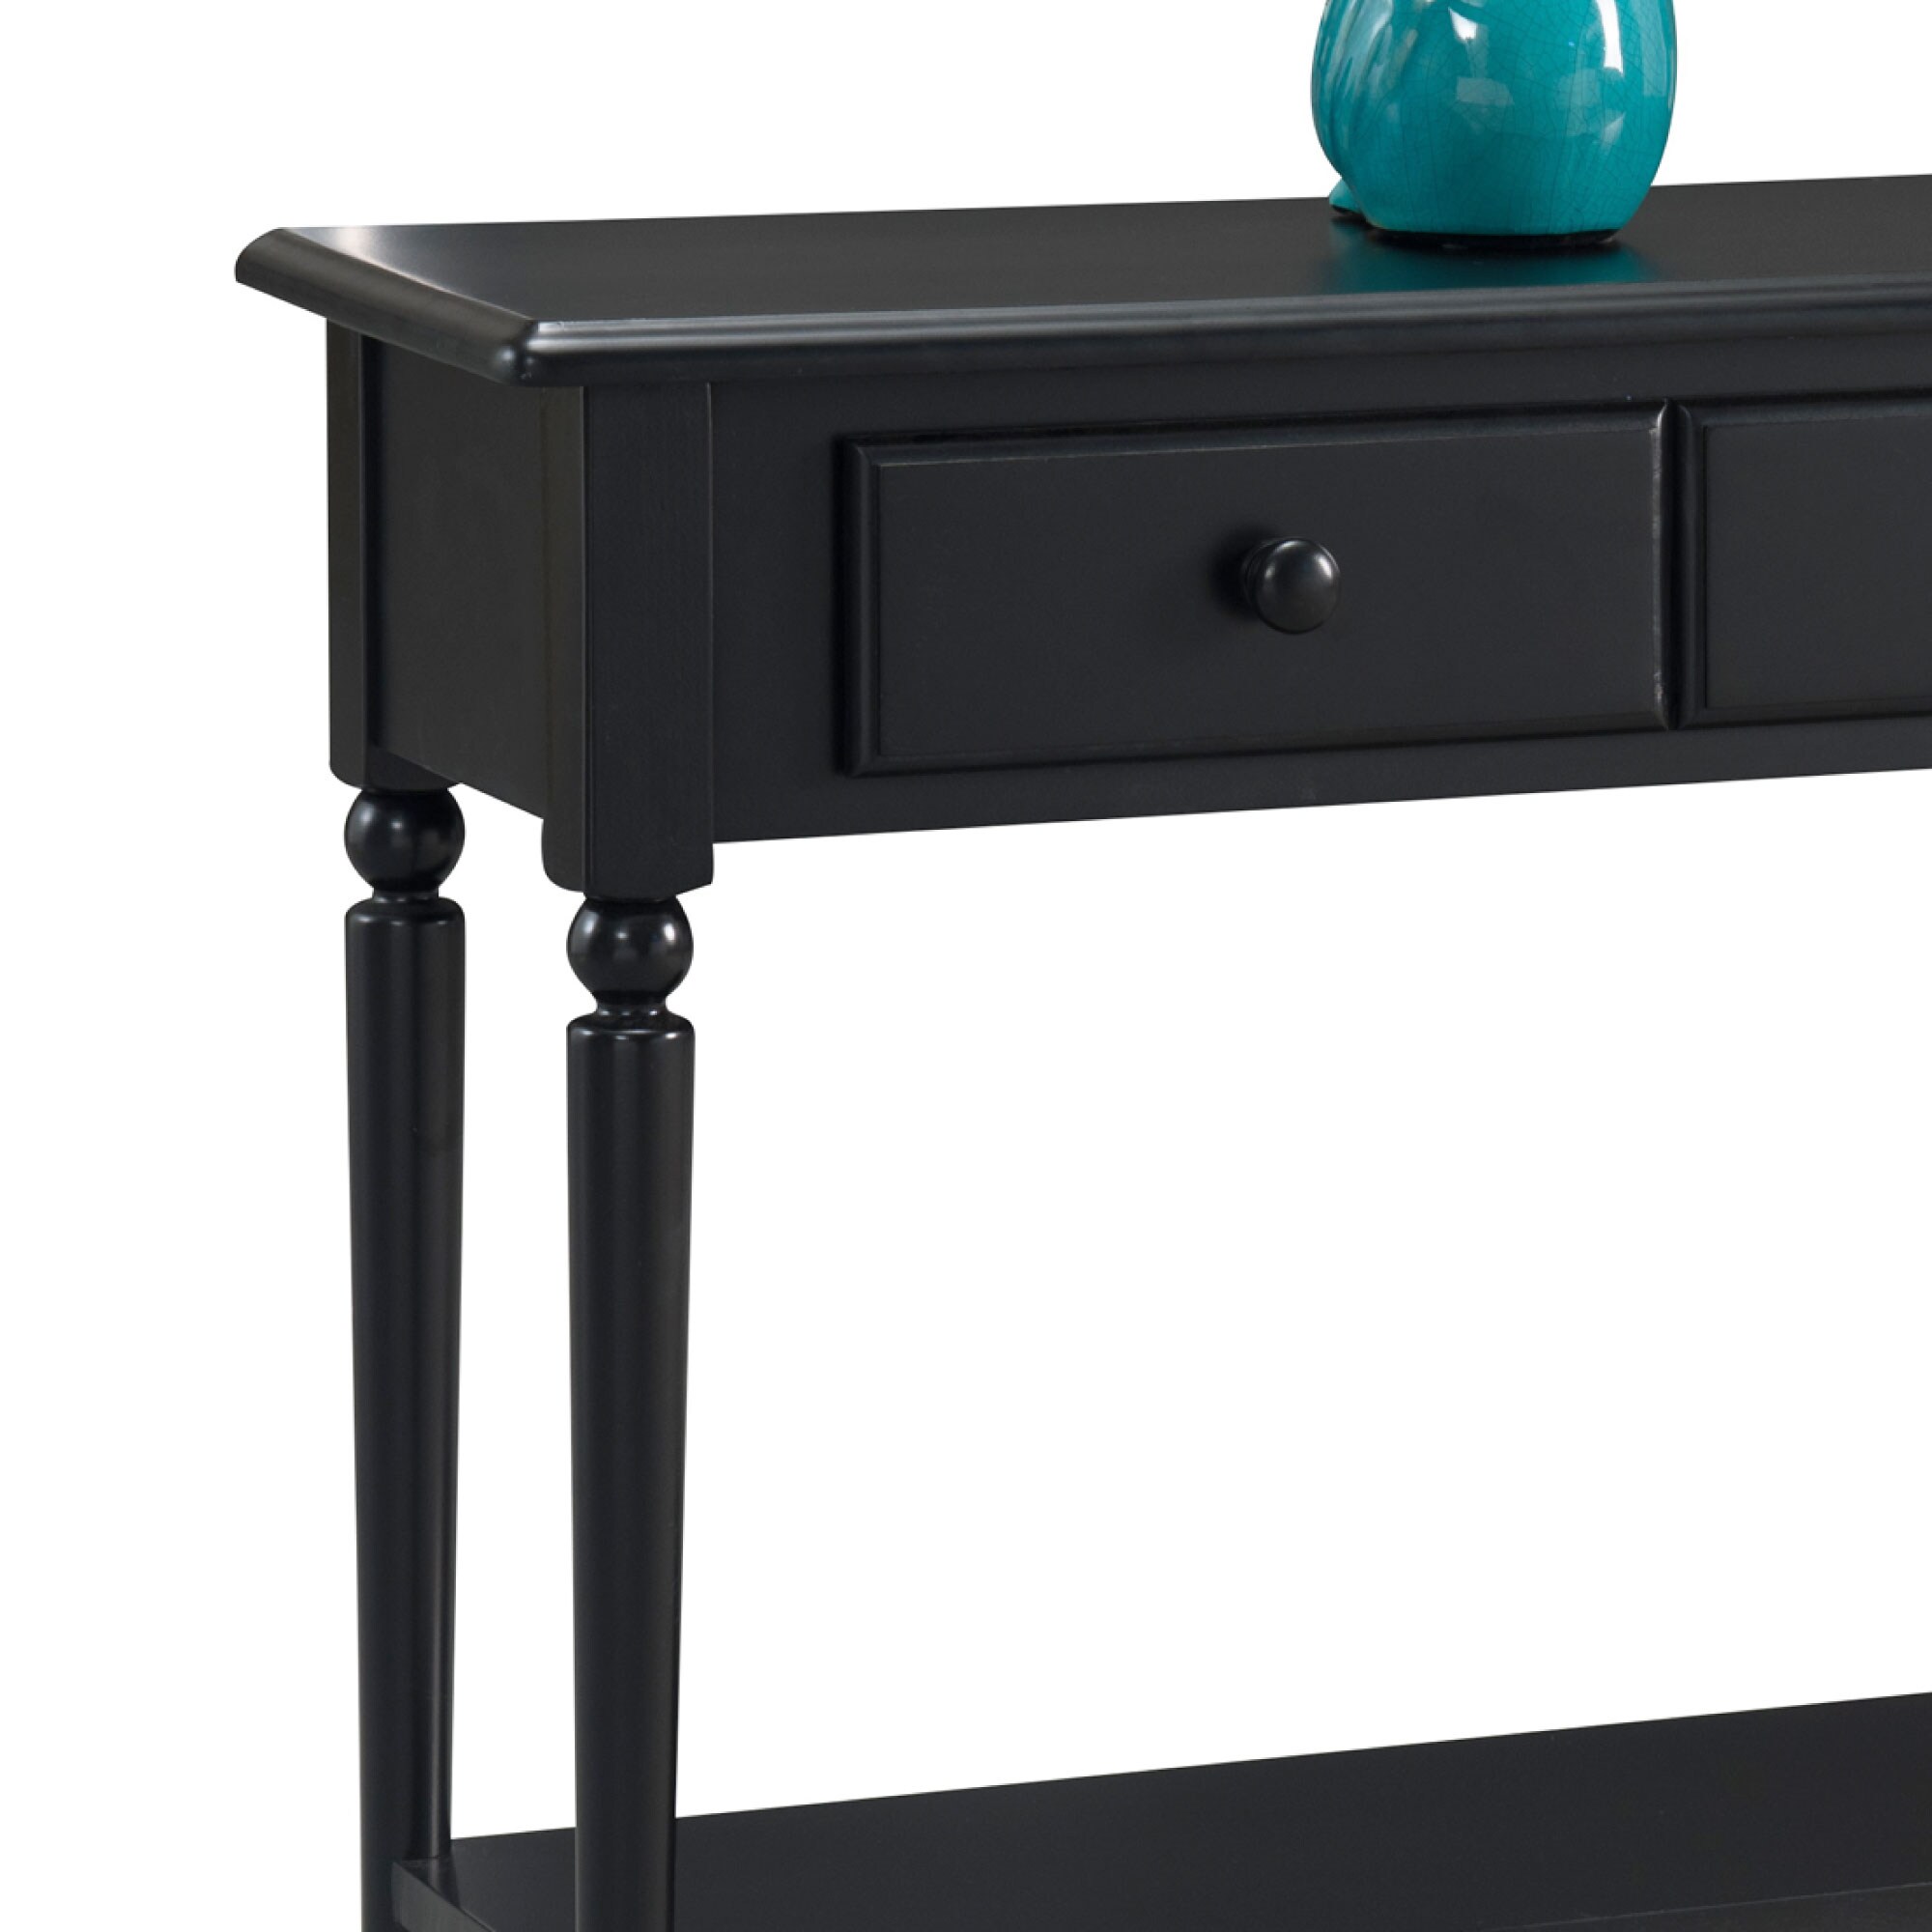 Leick Coastal Notions 2 Drawer Console Table with Shelf in Swan Black 